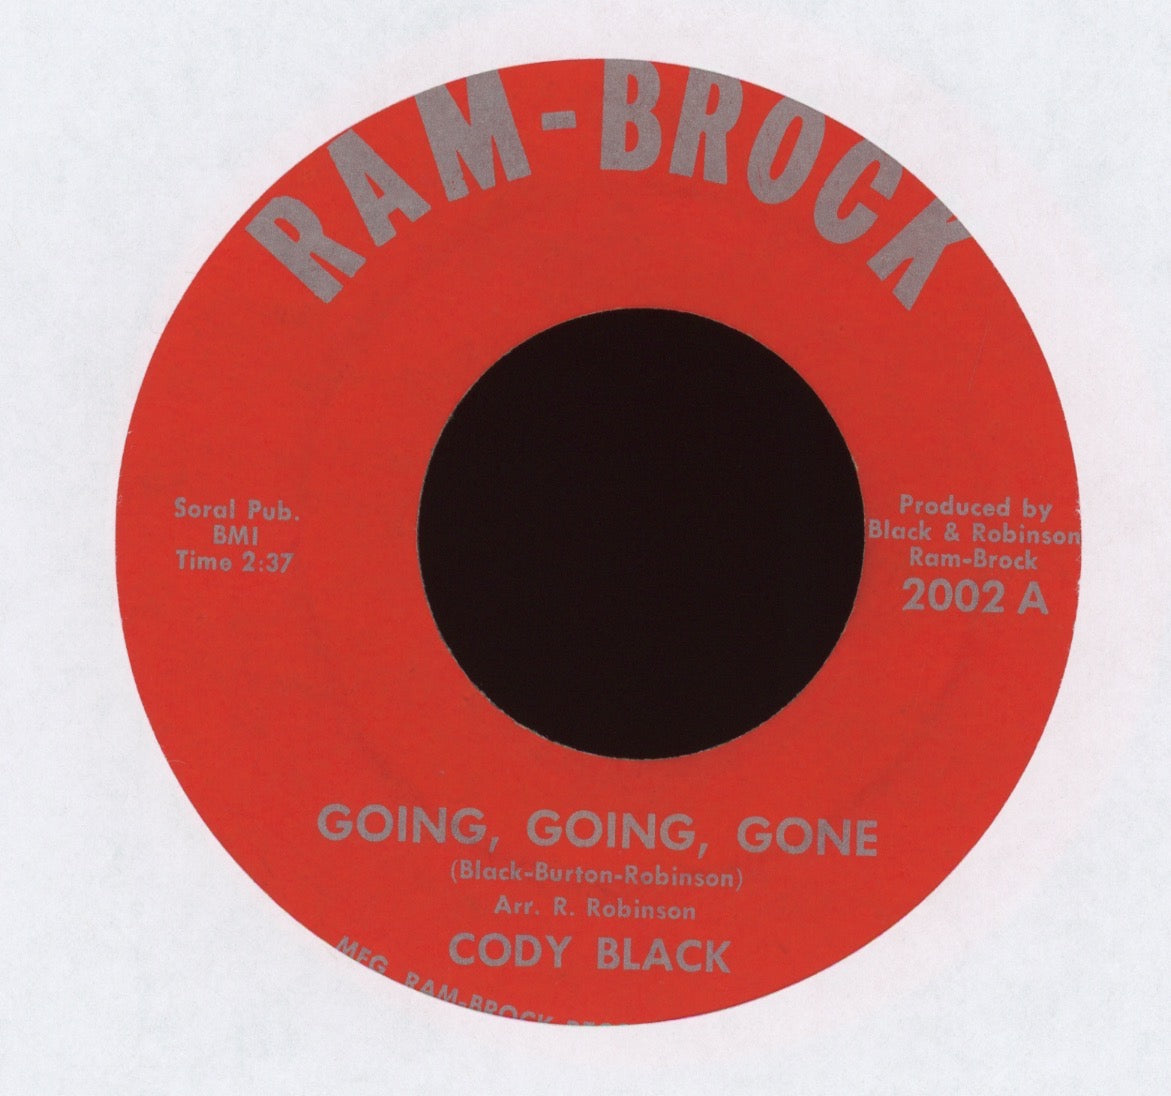 Cody Black - Going, Going, Gone on Ram-Brock Northern Soul 45